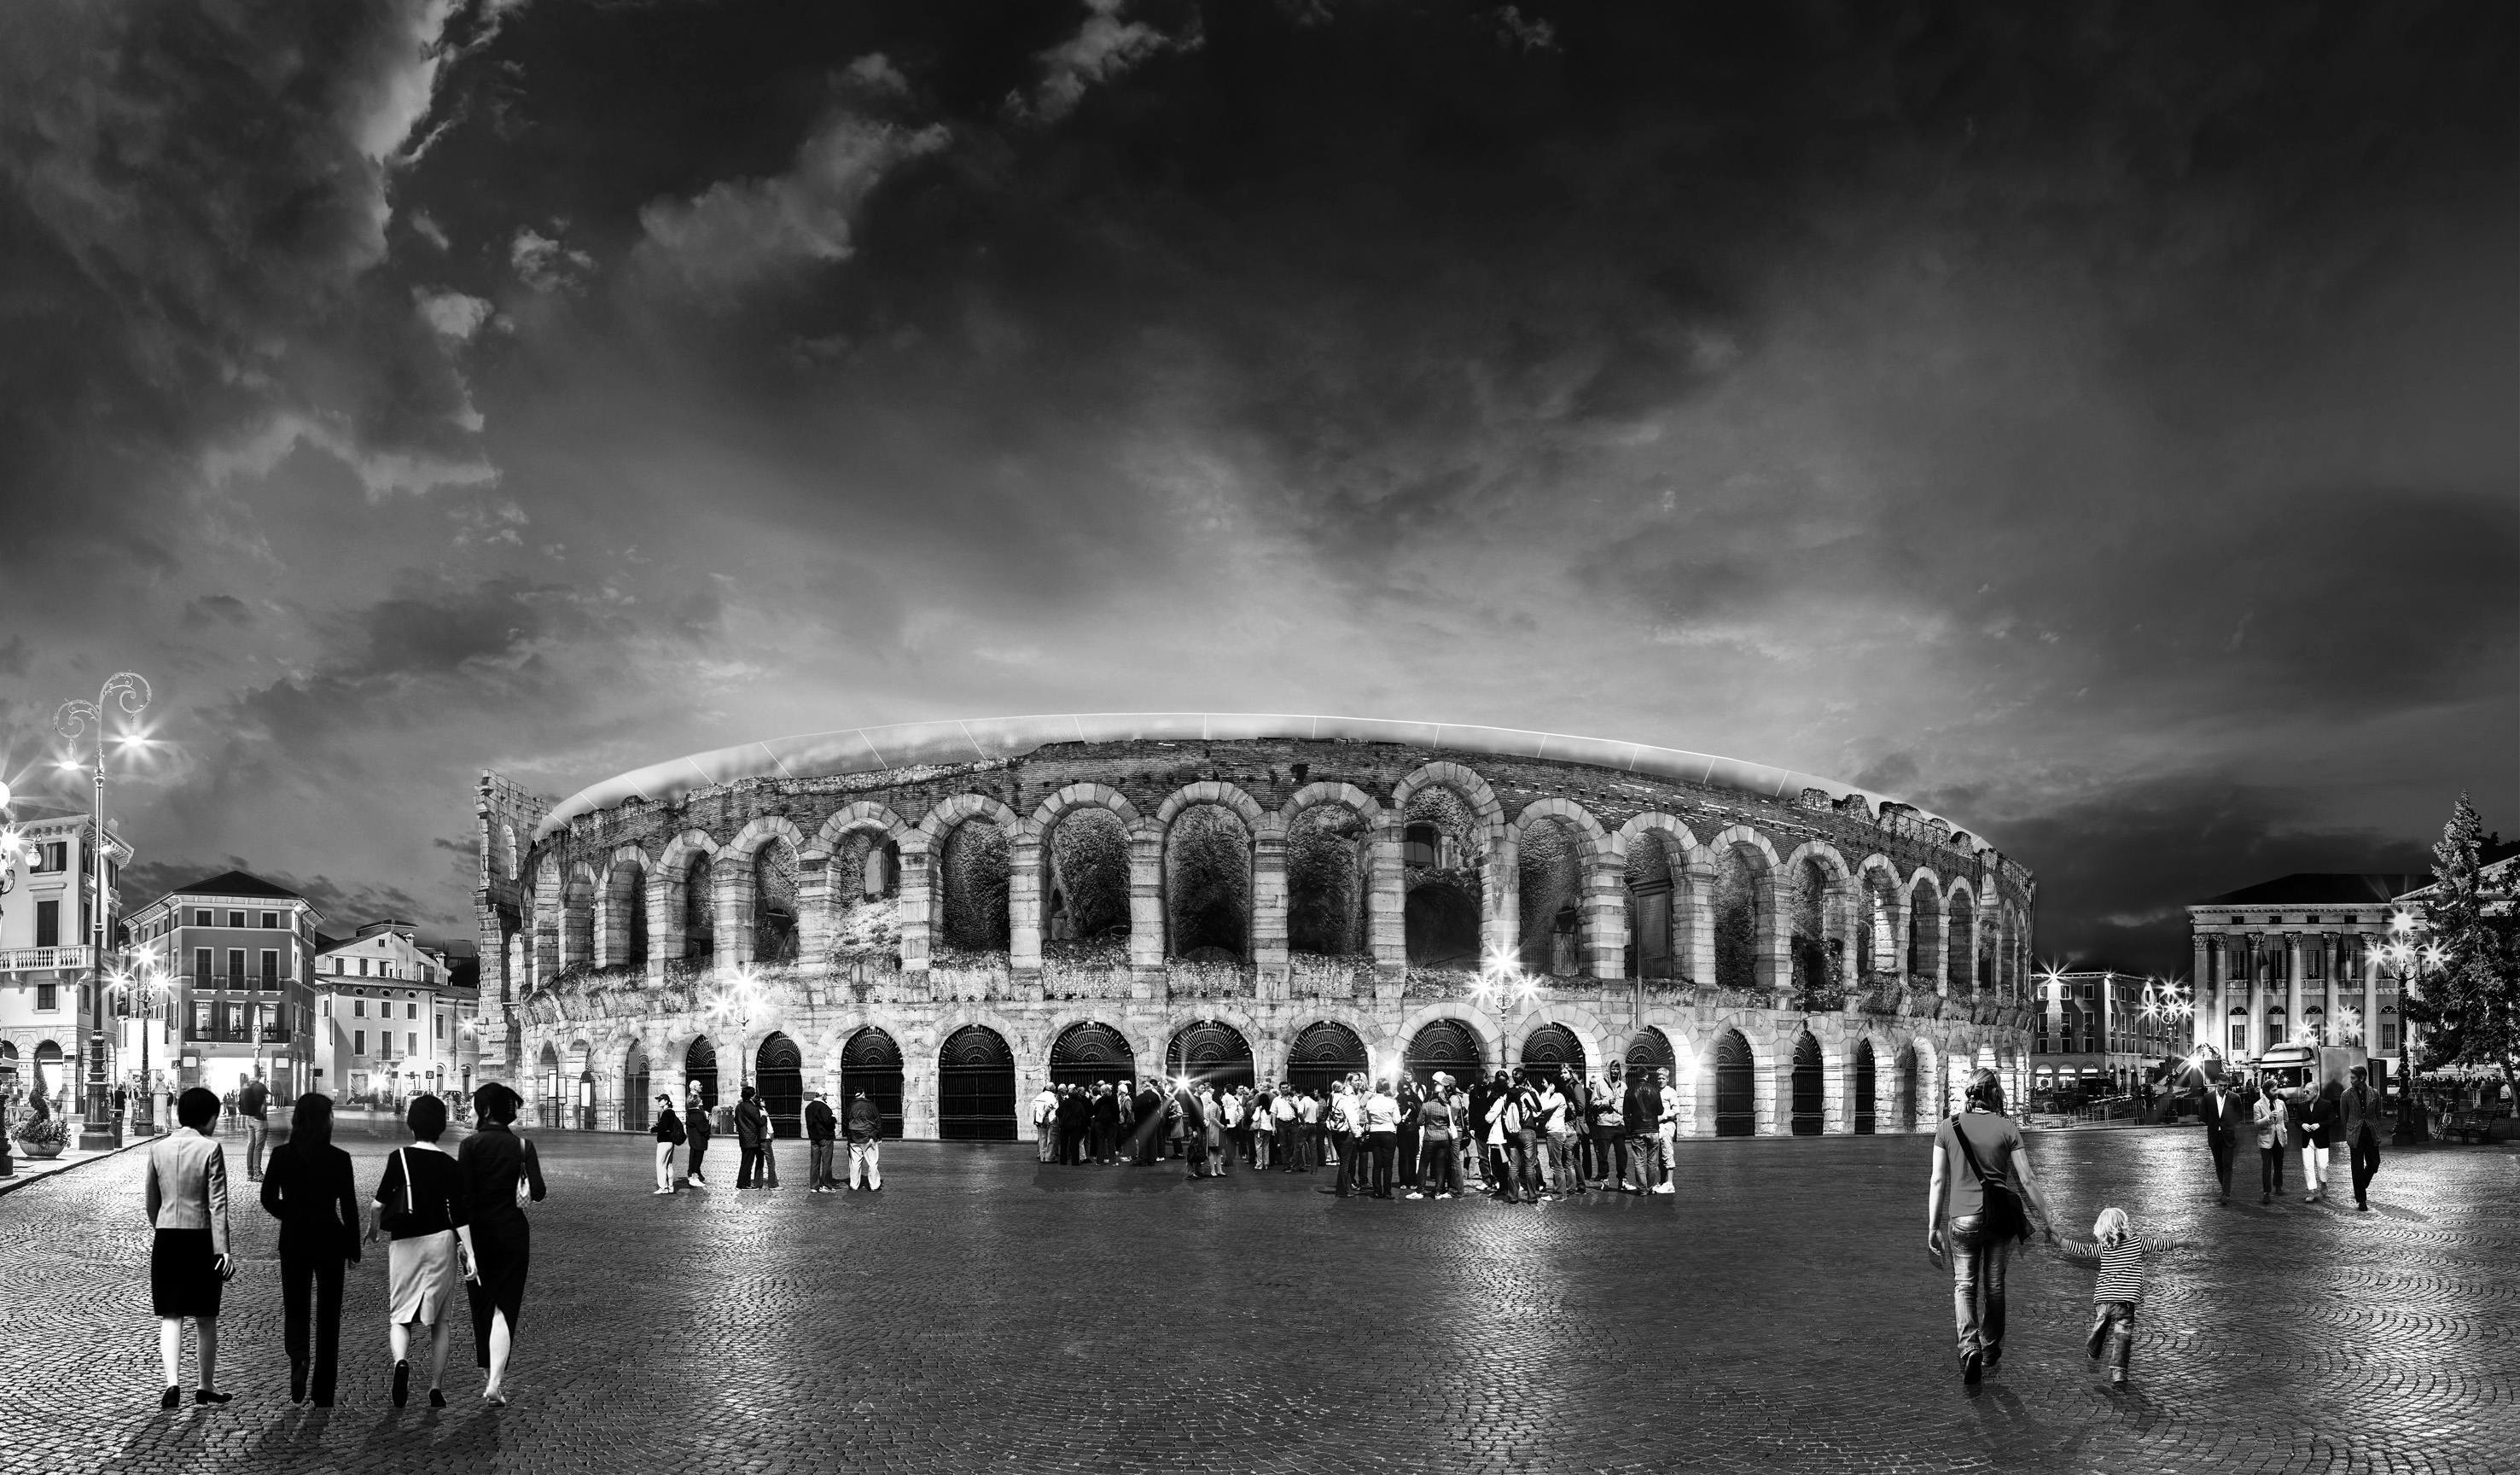 verona arena italy roman architecture old amphitheatre ancient urban europe landmark famous theater tourism opera amphitheater landscape culture town stadium travel panorama panoramic scenic italian art european monument people facade sky view summer place blue vacation beautiful arch piazza stone history city di bra night evening sunset dark light downtown building person human